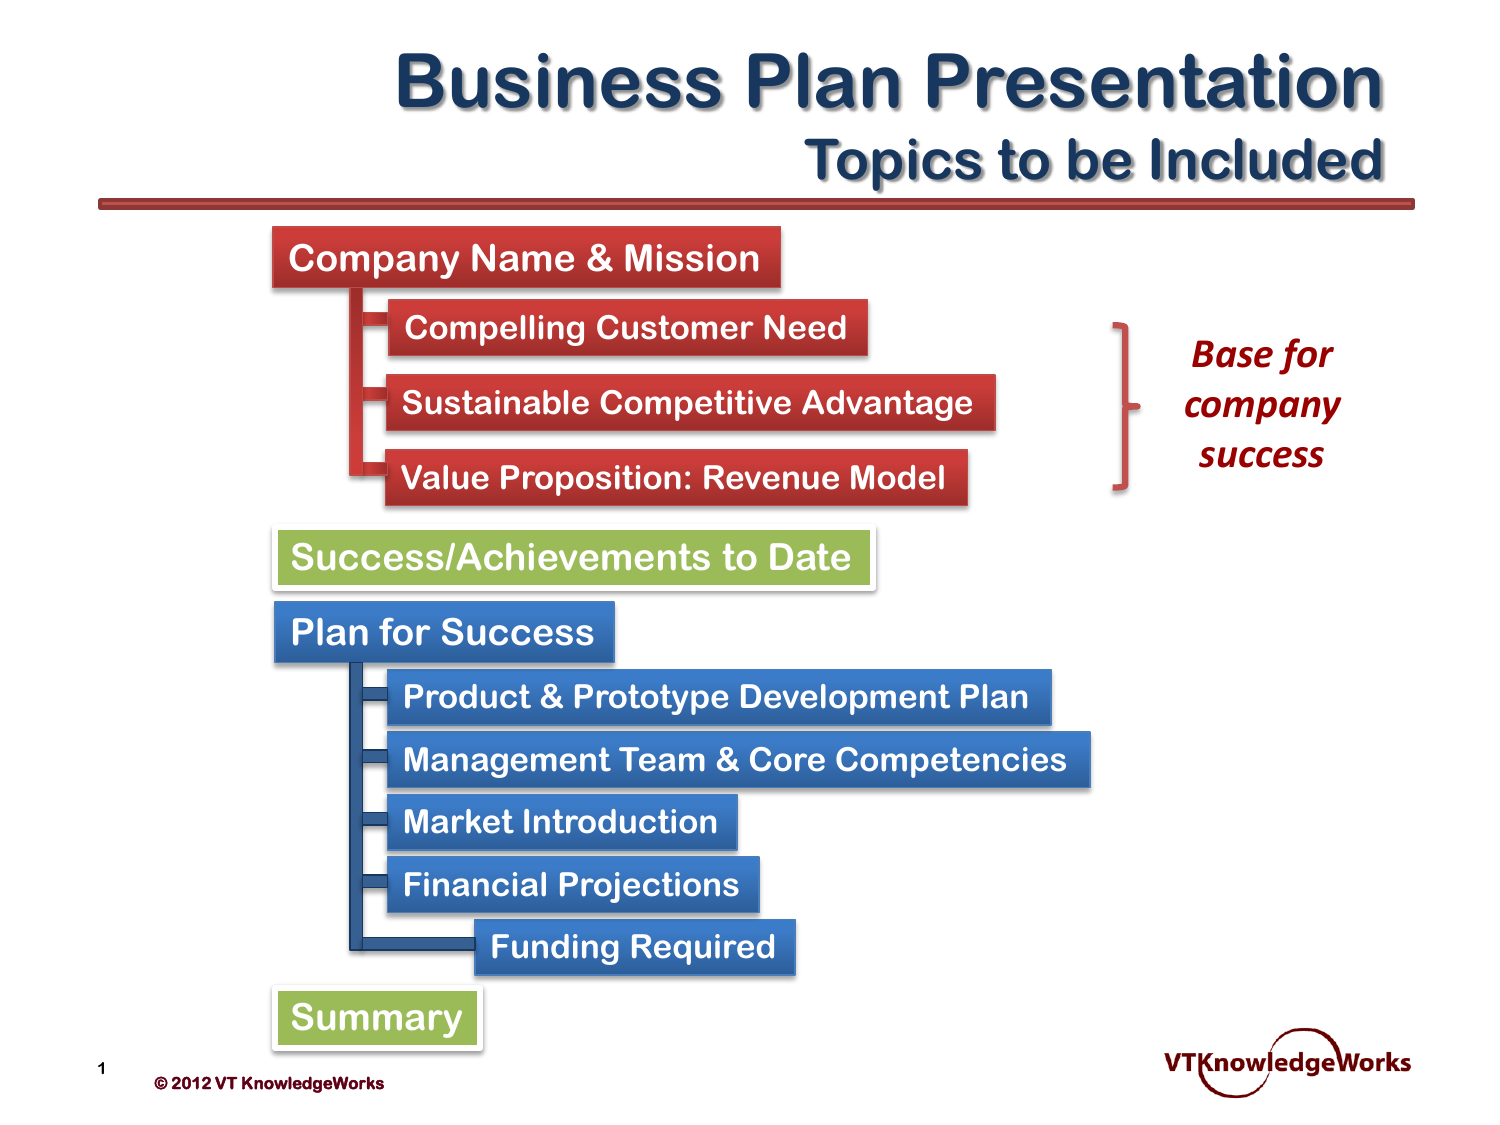 value proposition for business plan